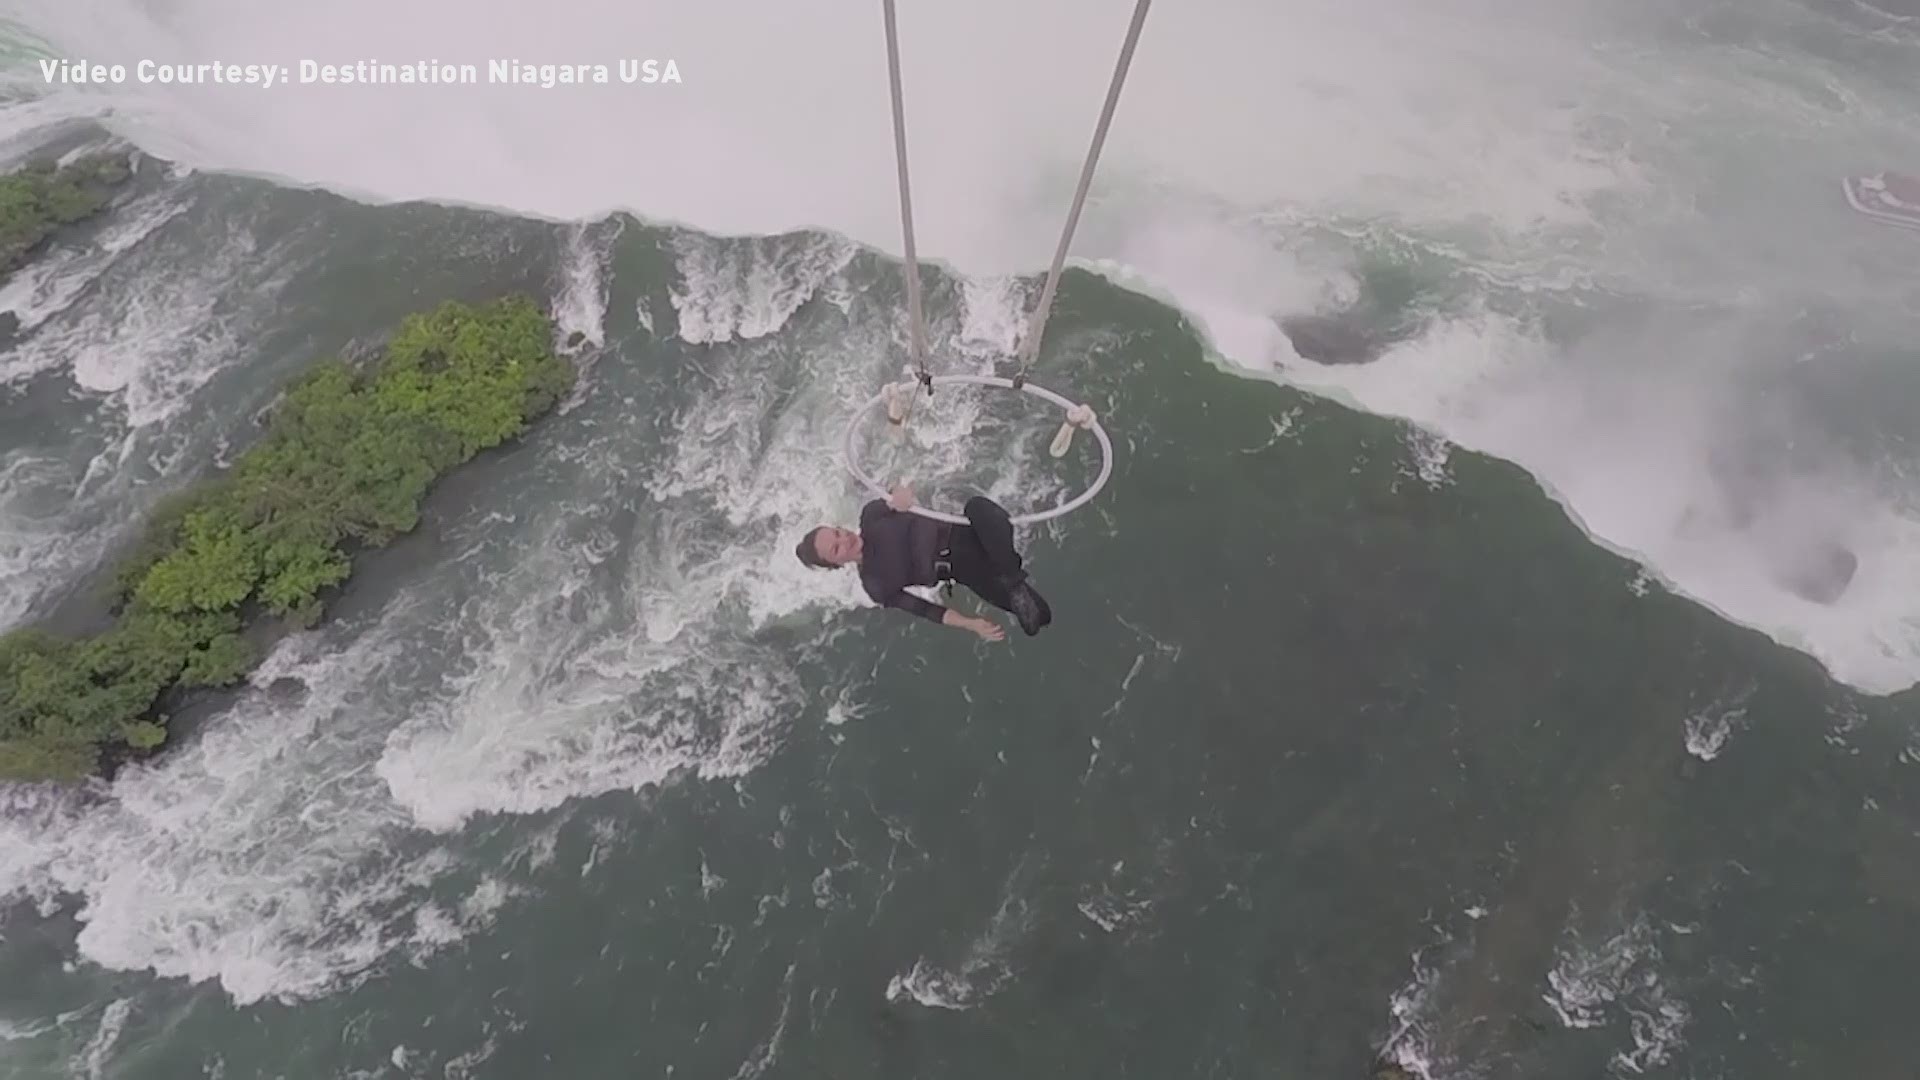 Video from the helicopter captures Erendira Wallenda hanging from her teeth and toes above Niagara Falls. Video Courtesy: Destination Niagara USA